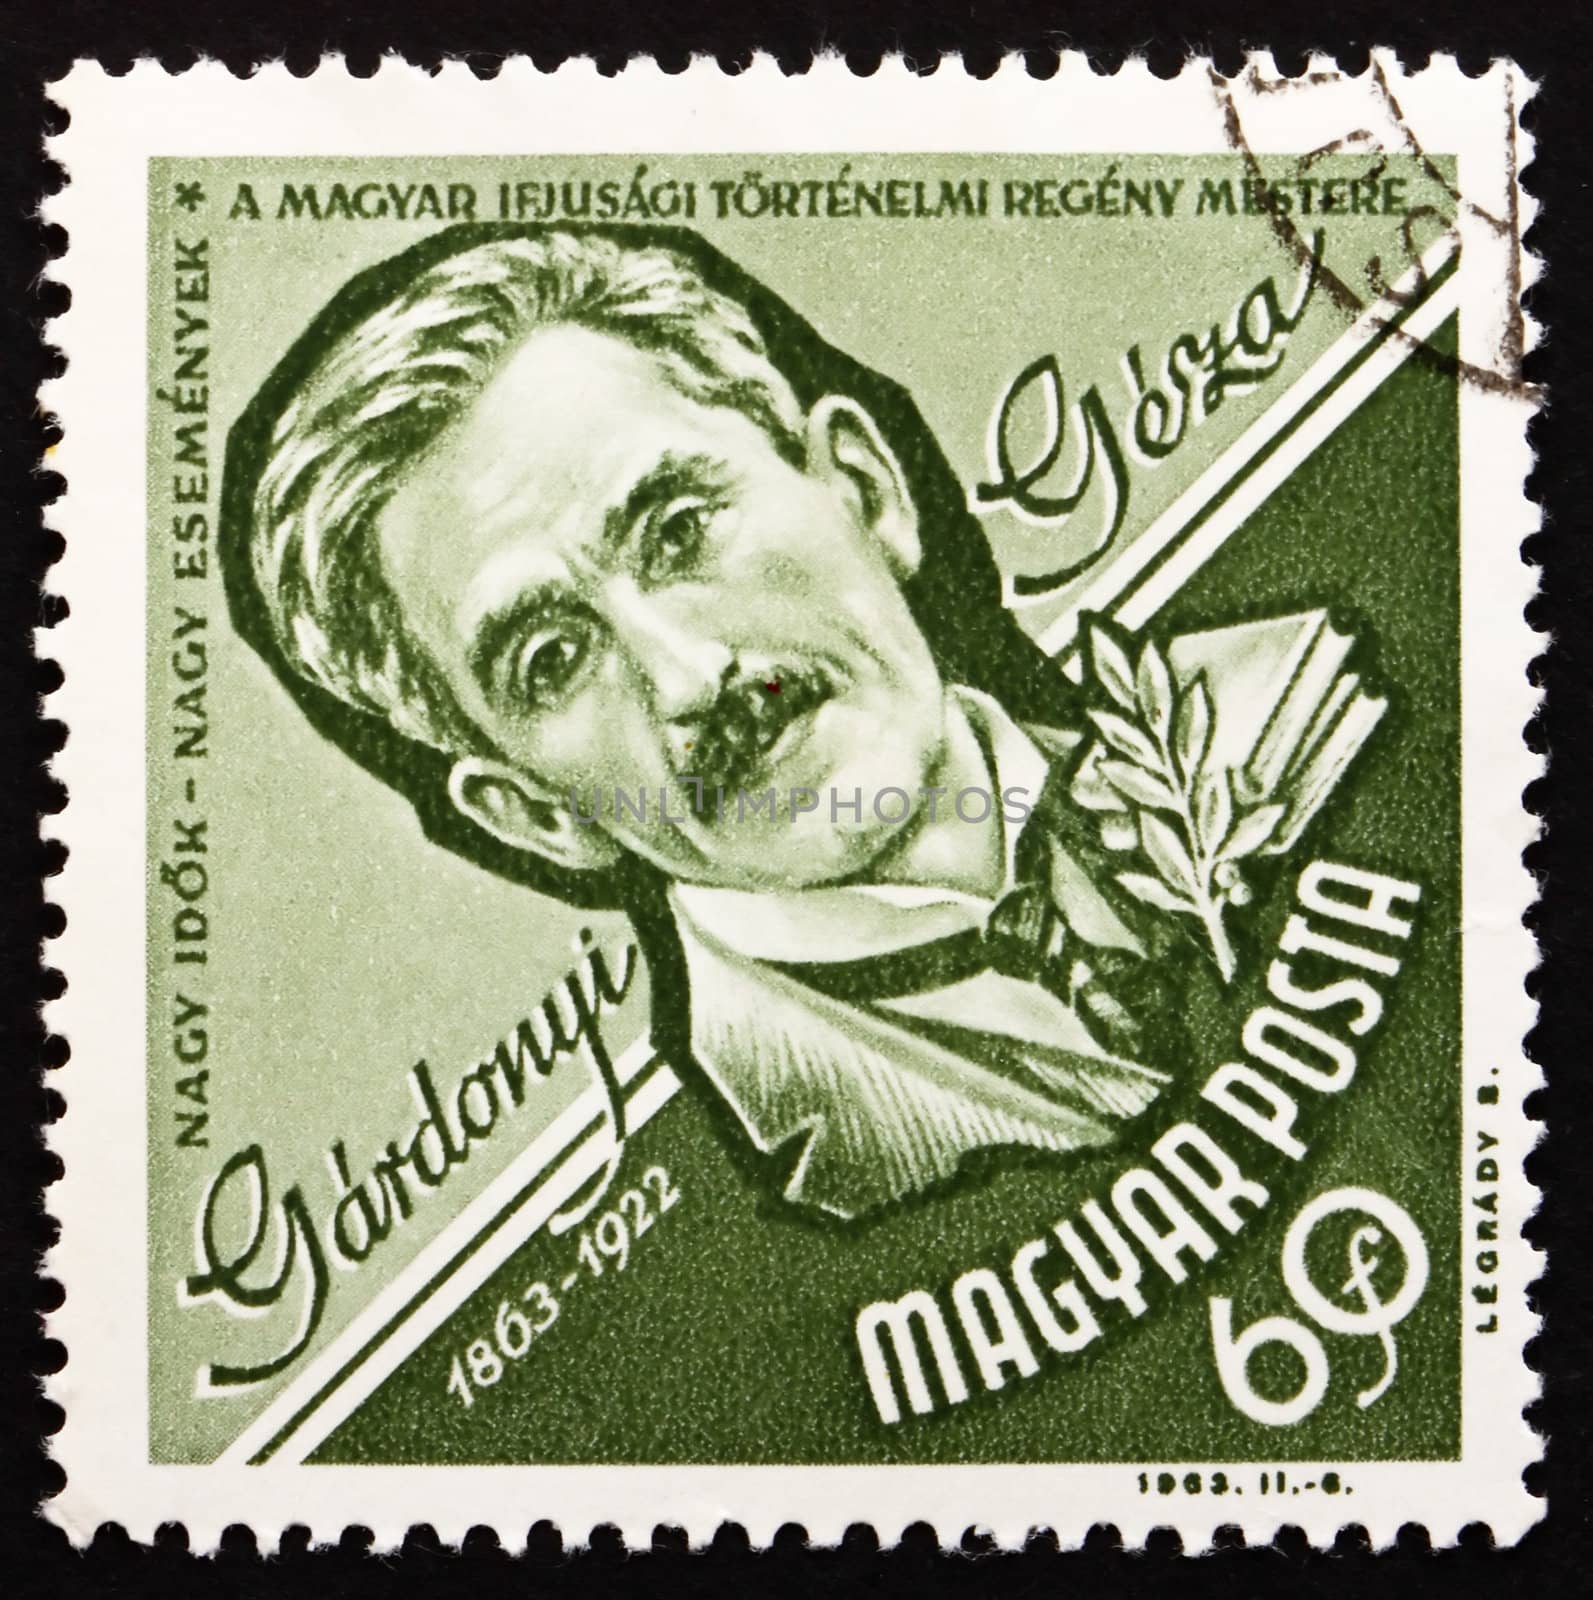 HUNGARY - CIRCA 1963: a stamp printed in the Hungary shows Geza Gardonyi, Journalist, Writer of Hungarian Historical Novels for Youth, circa 1963